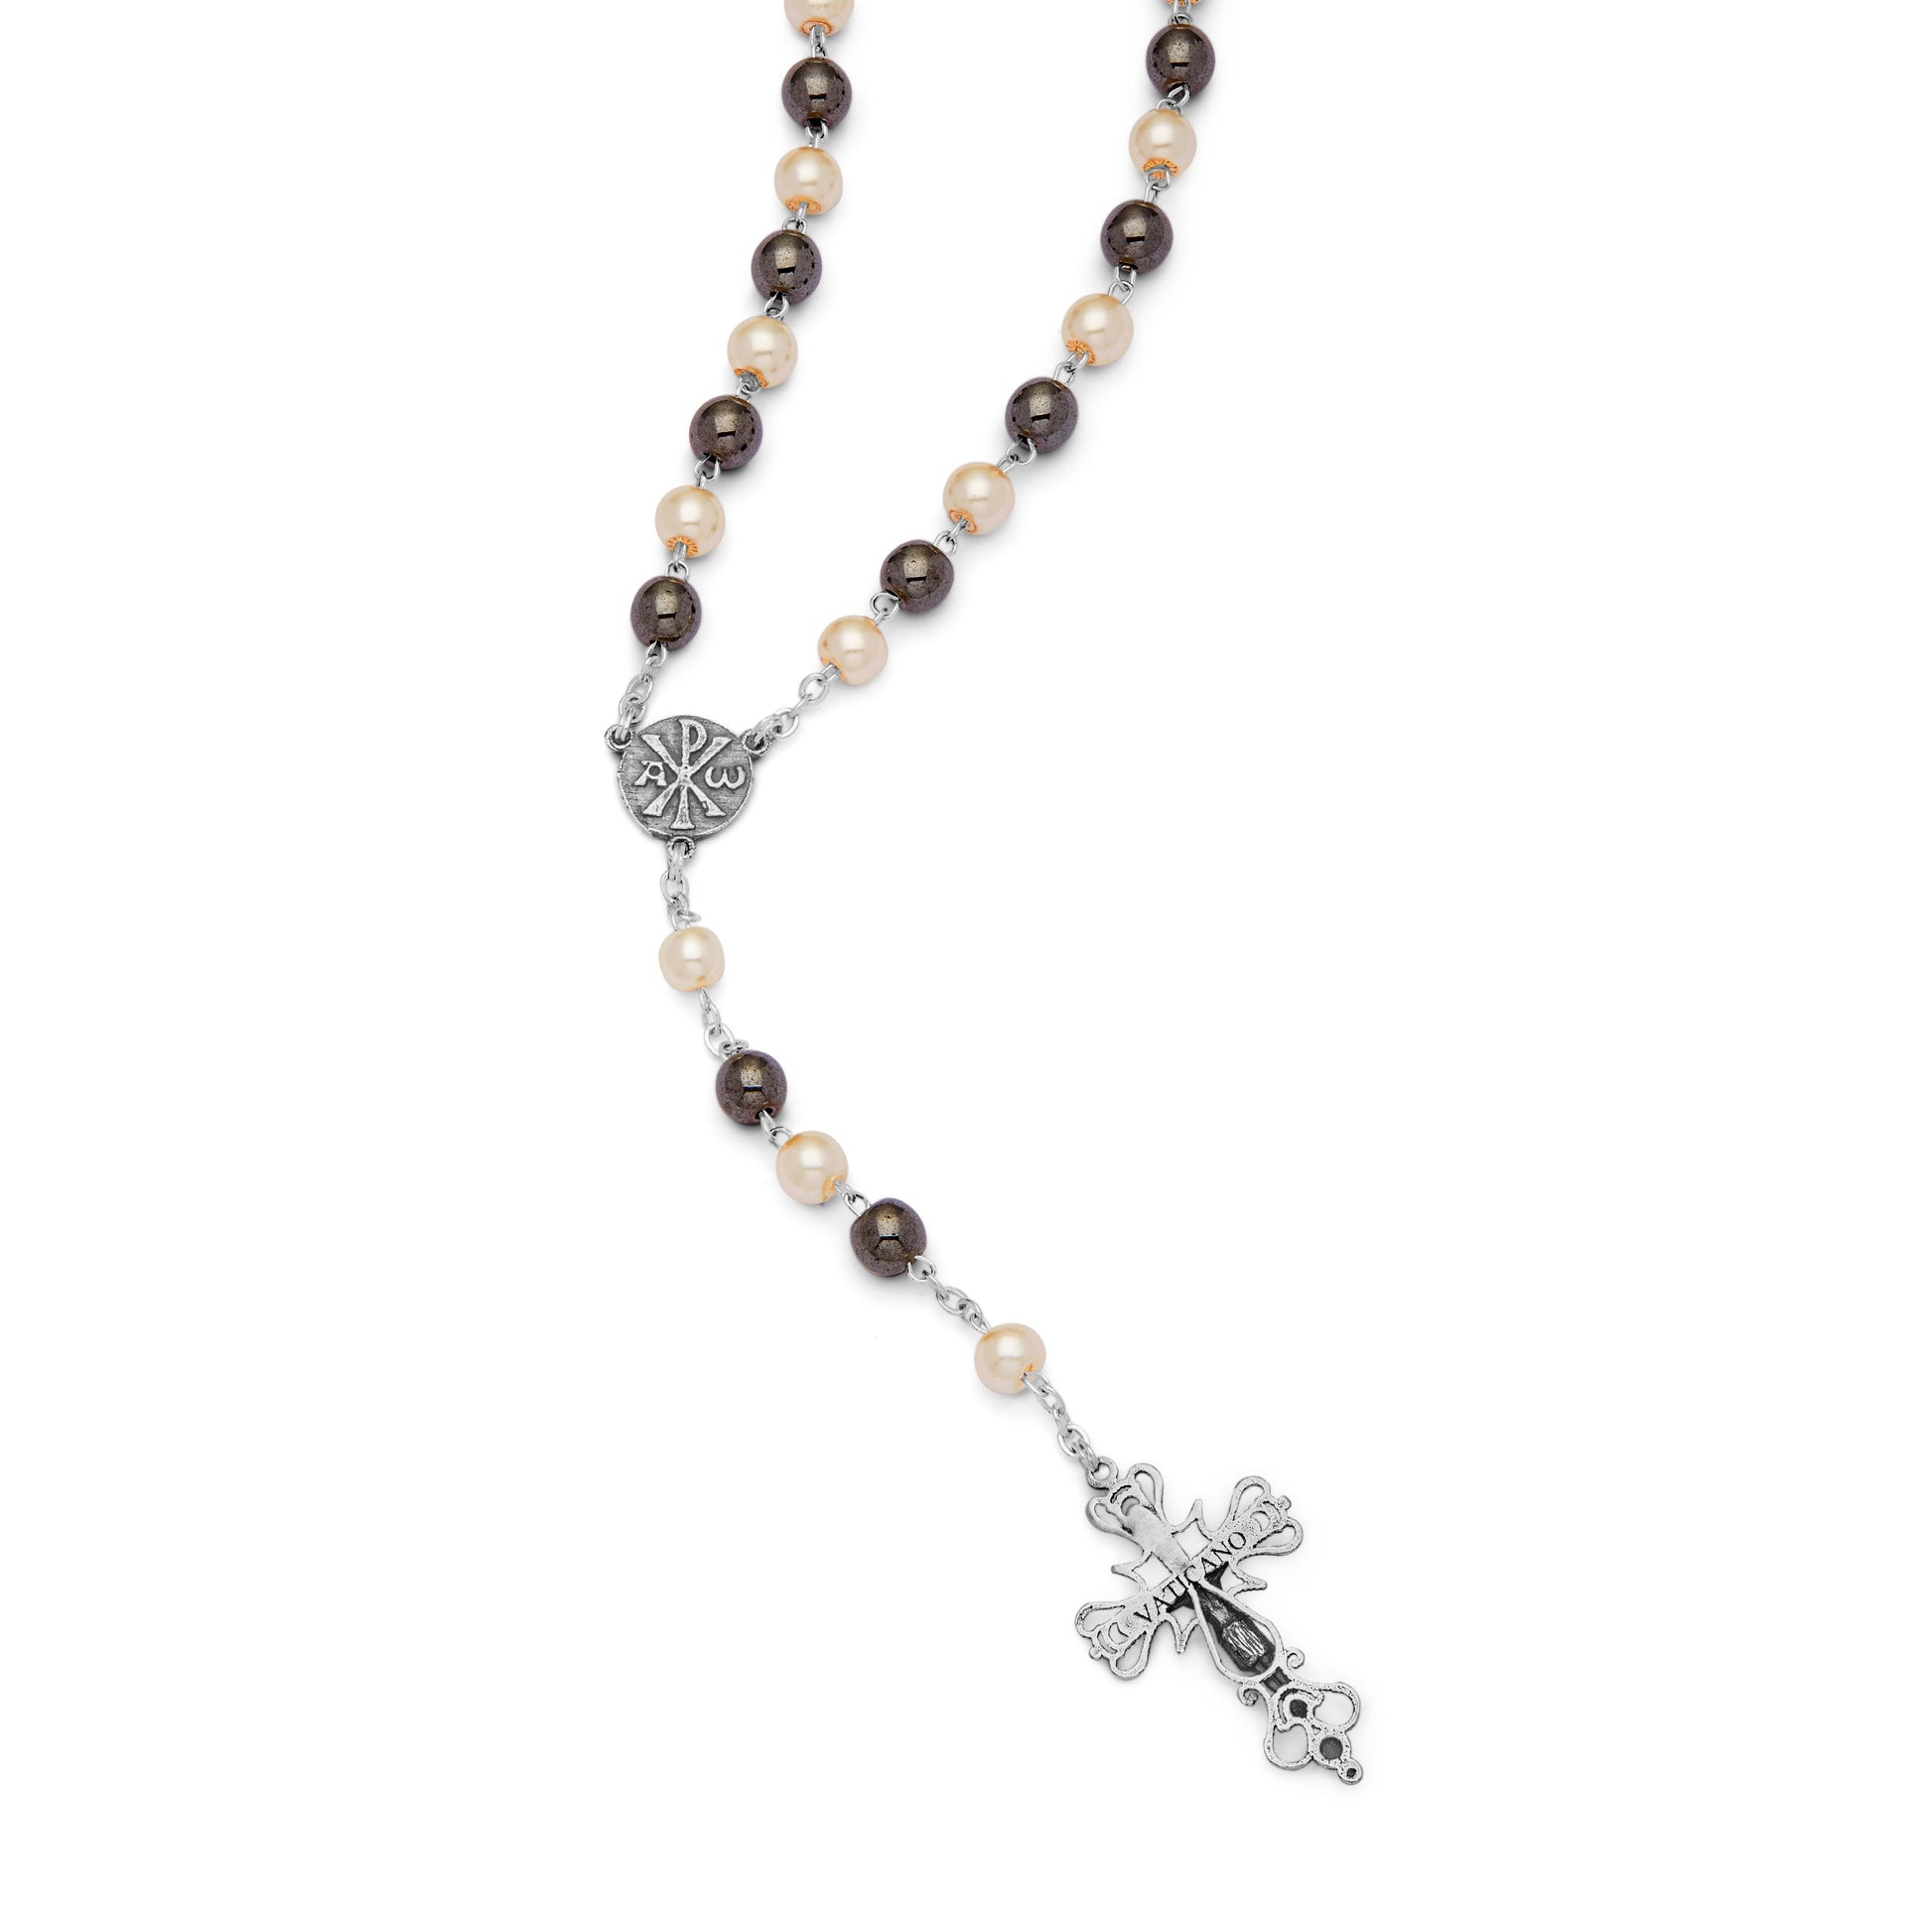 MONDO CATTOLICO Prayer Beads Sterling Silver Rosary Glass Pearl and Hematite Beads